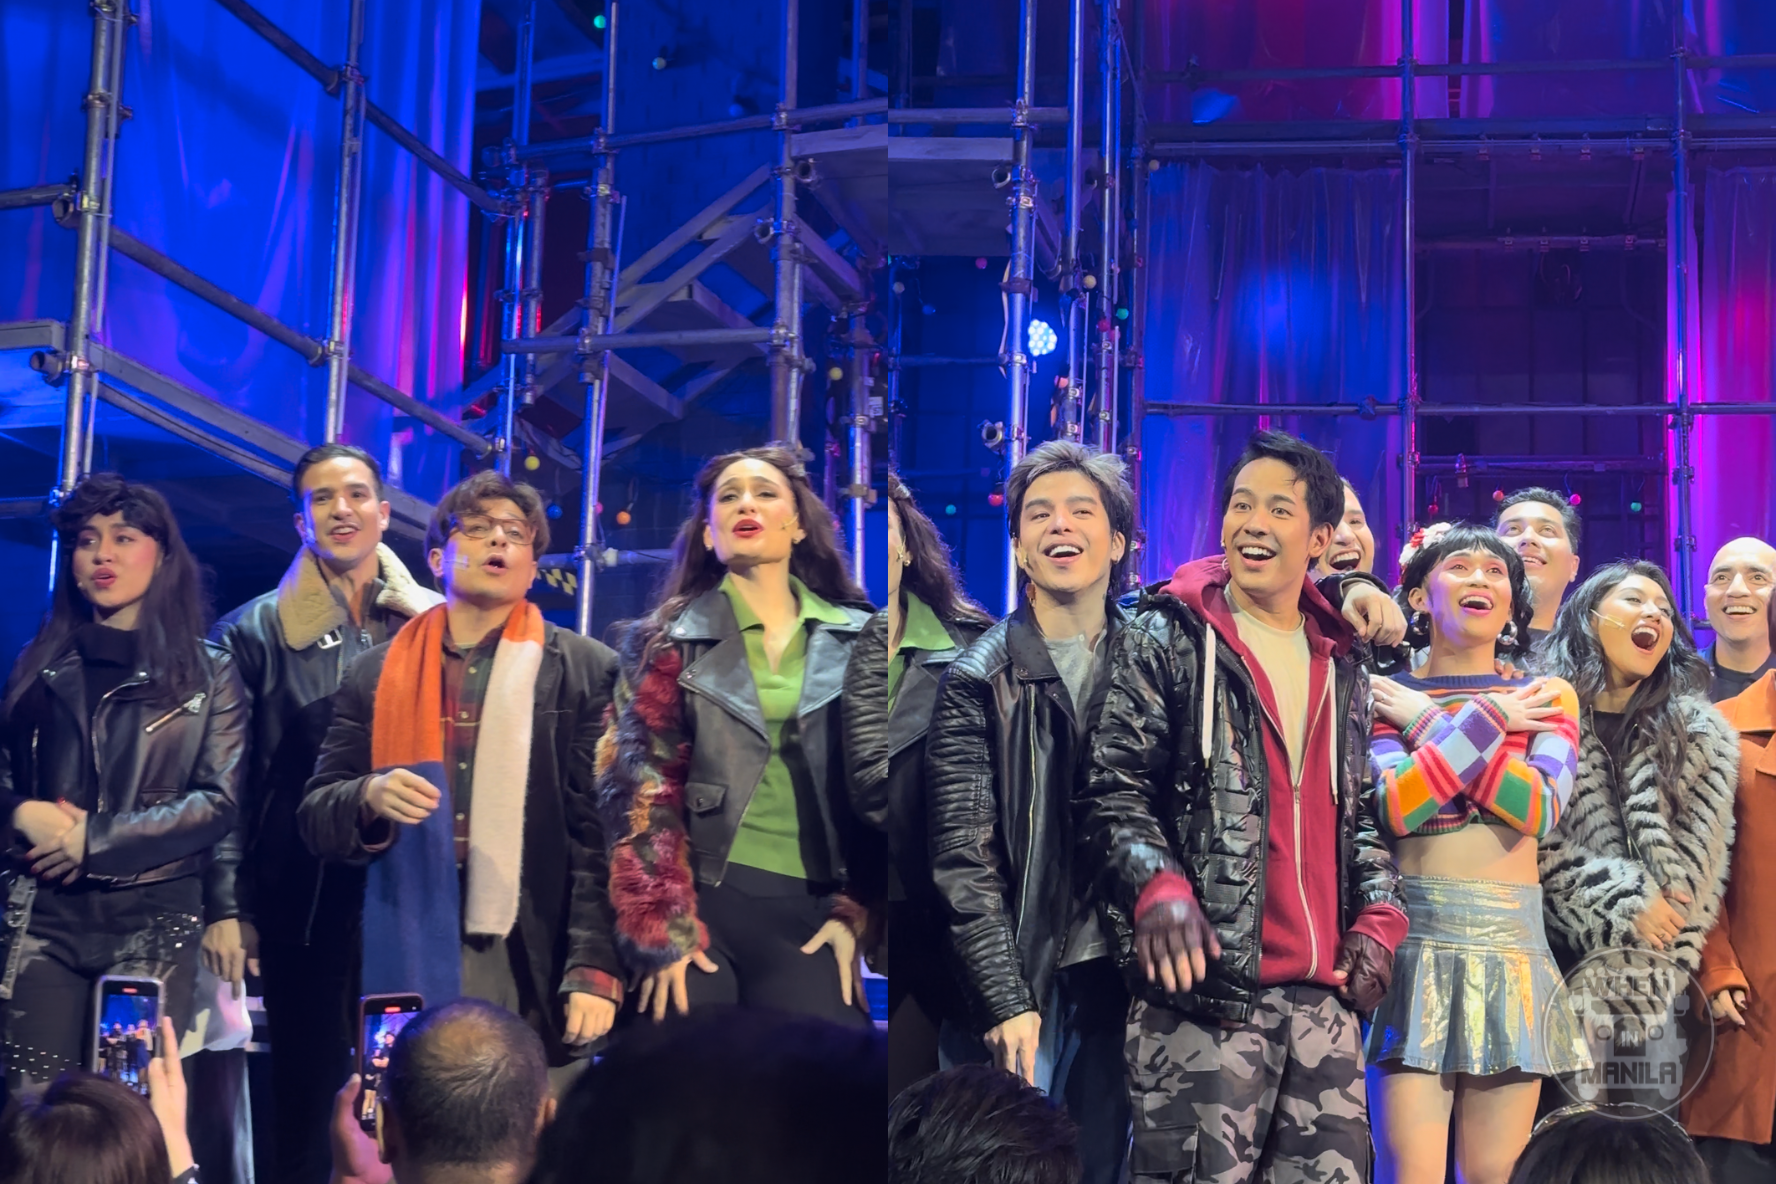 WATCH: The 2010 Cast of “Rent” Joins the 2024 Cast to Sing “Seasons of Love”